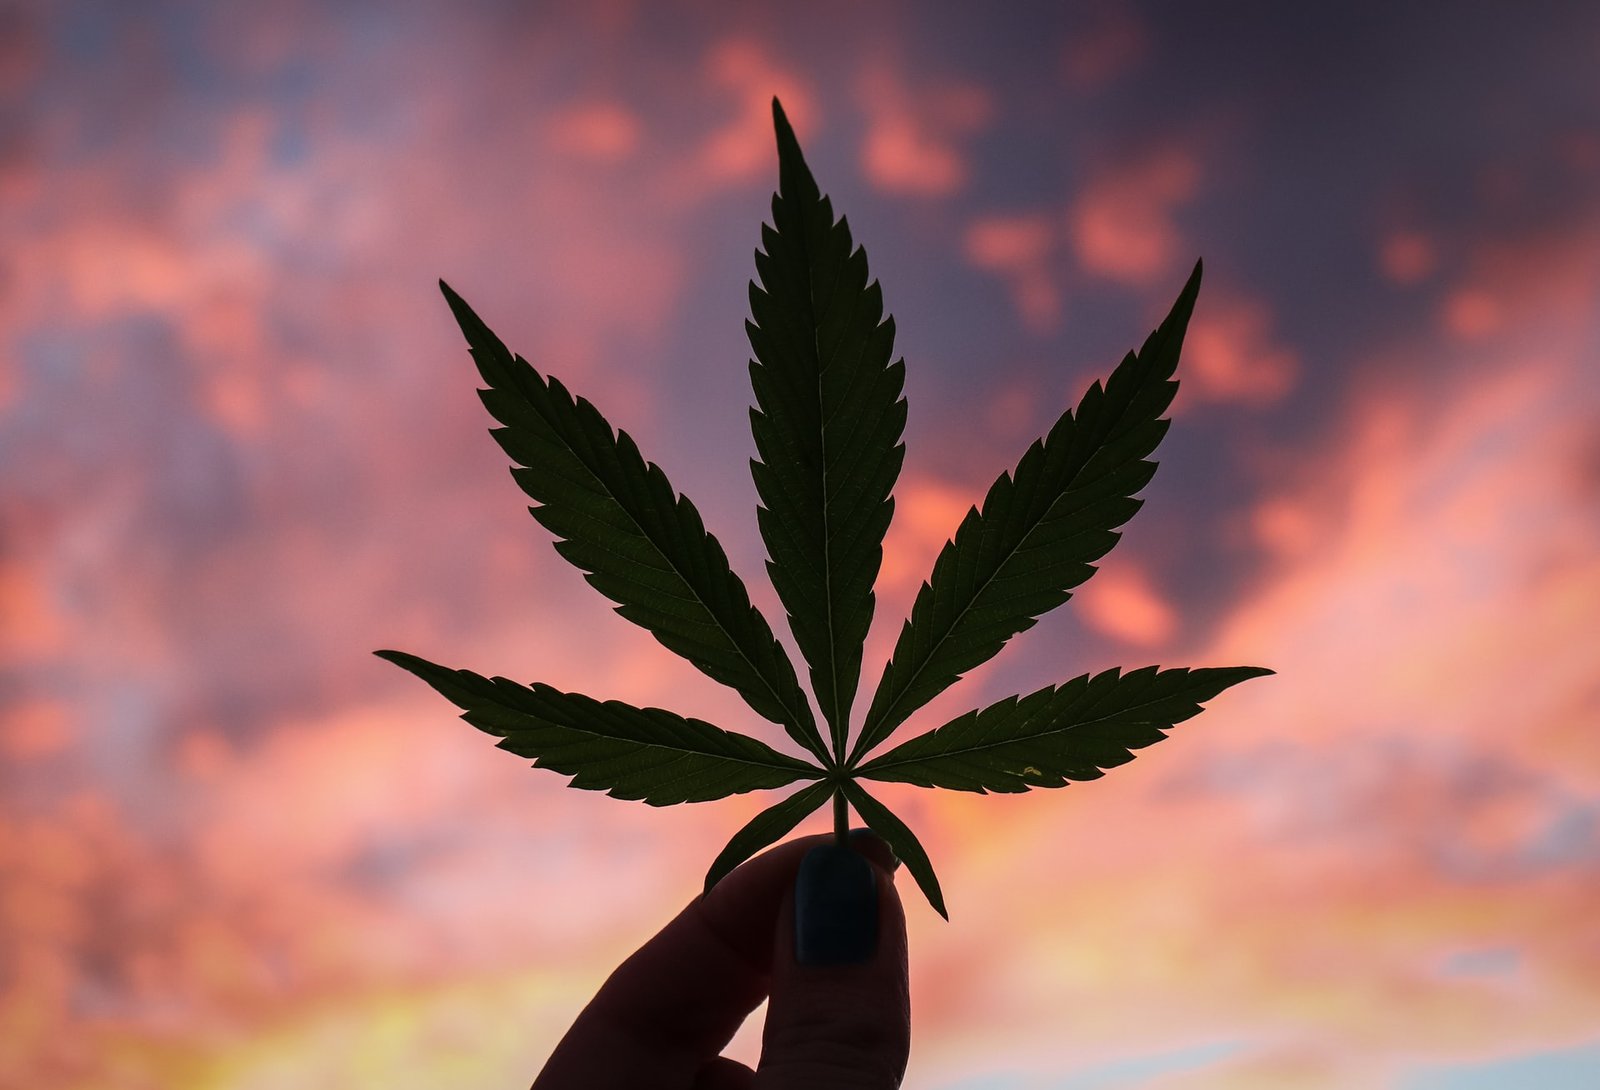 hand holding up cannabis leaf silhoutette on pink sky